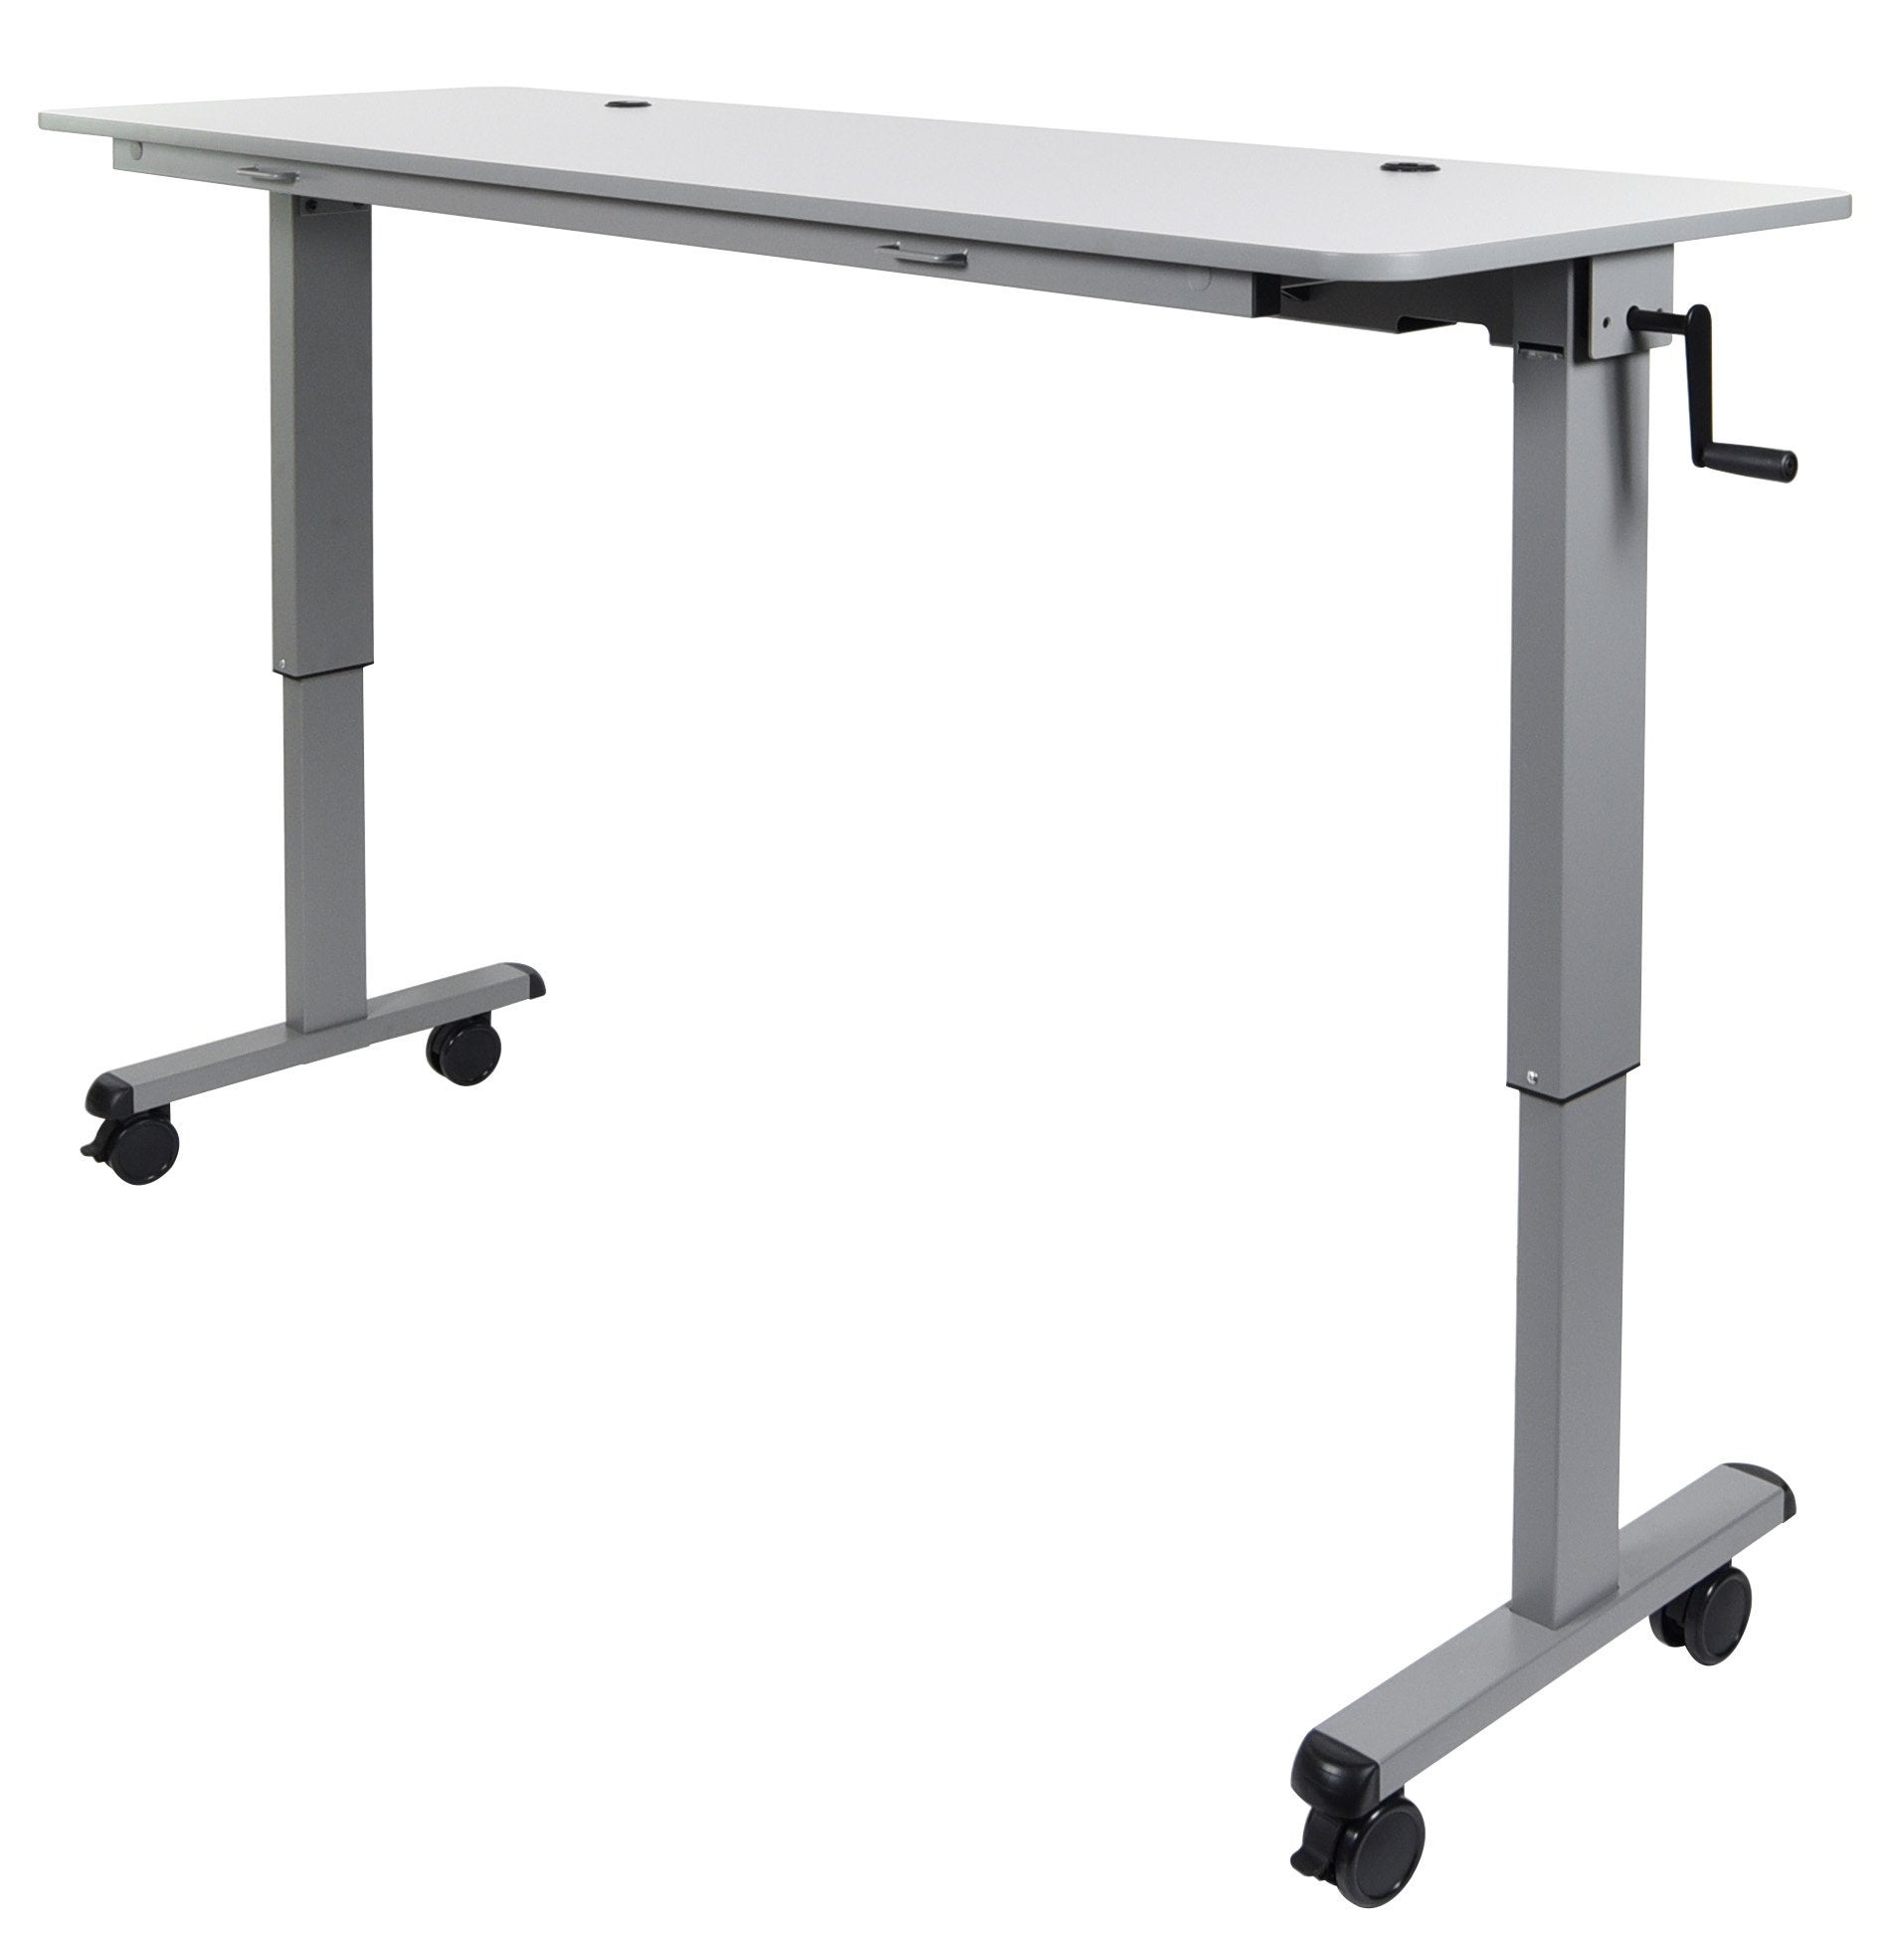 Luxor STAND-NESTC-72 Is A 72" Adjustable Flip Top Table Wih A Crank Handle